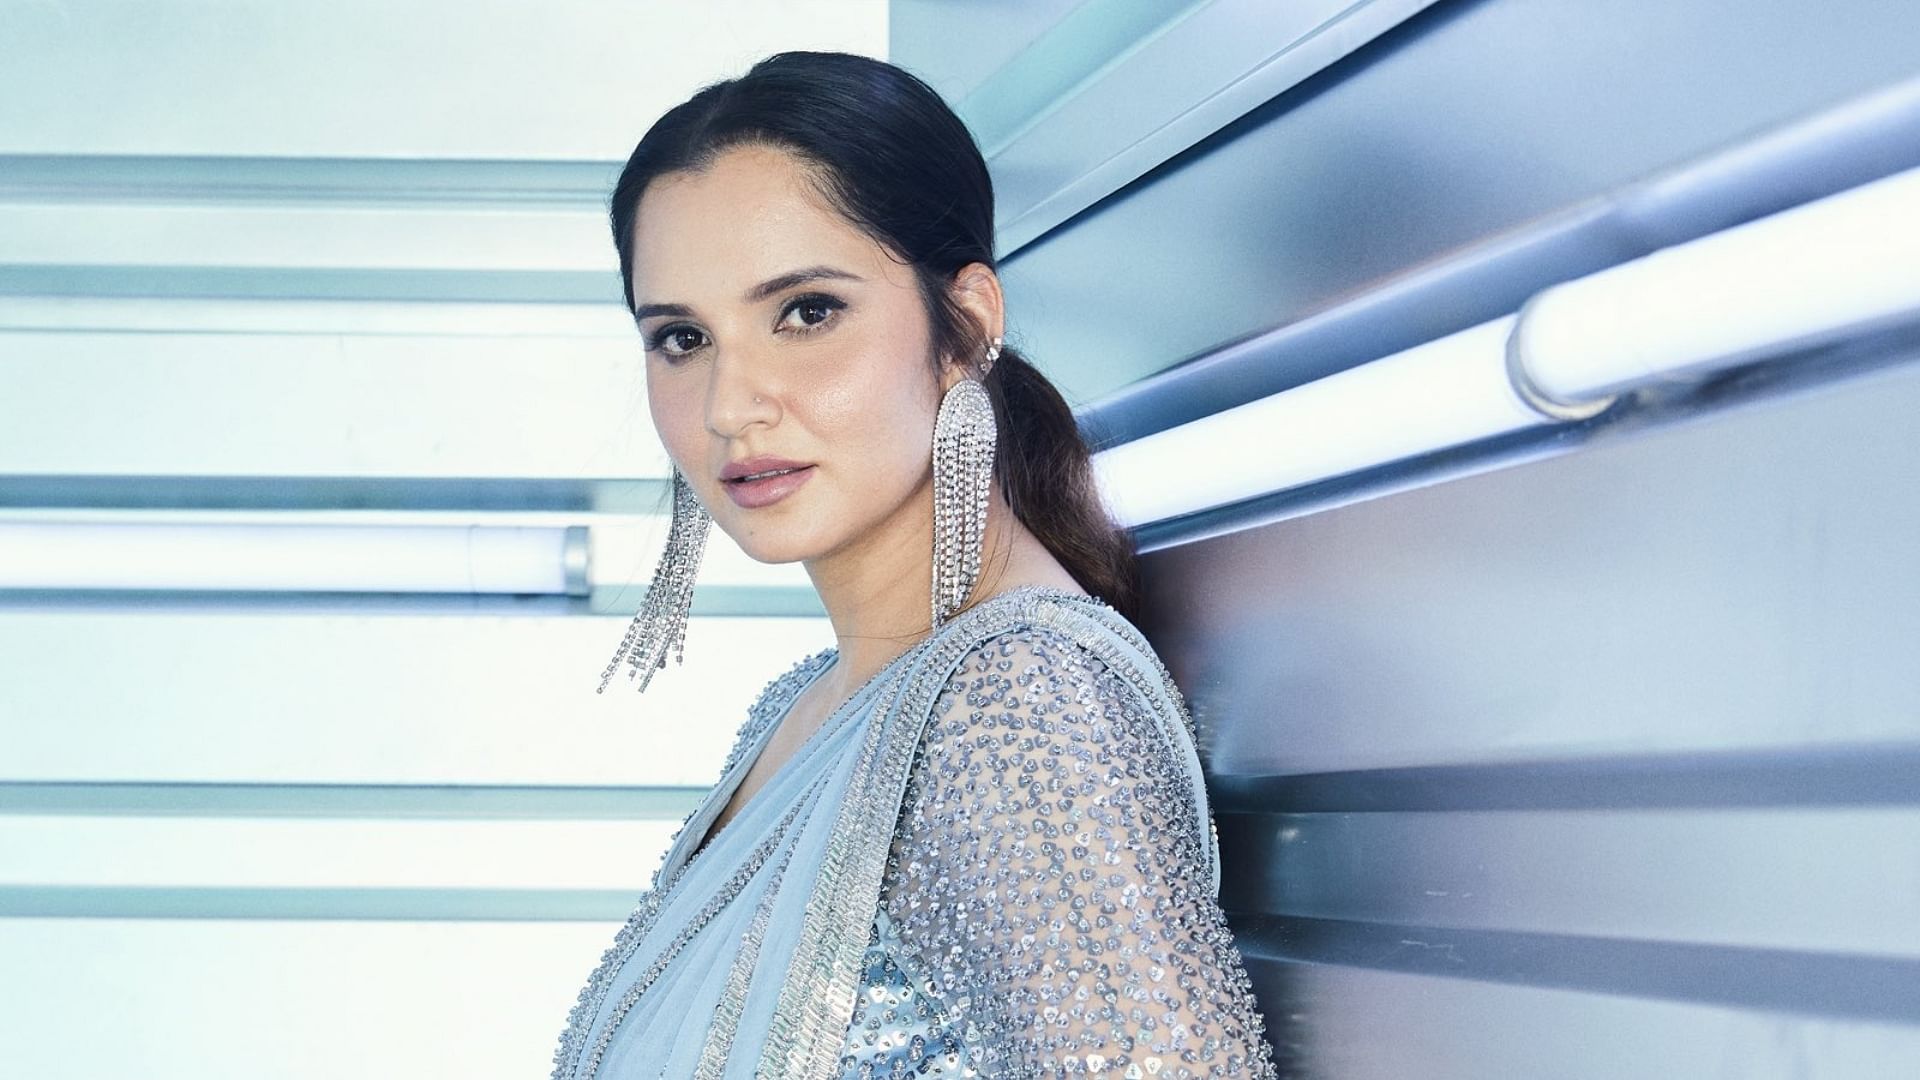 Viral: Sania Mirza’s powerful post, inspired by Urban Company's ad on women's success